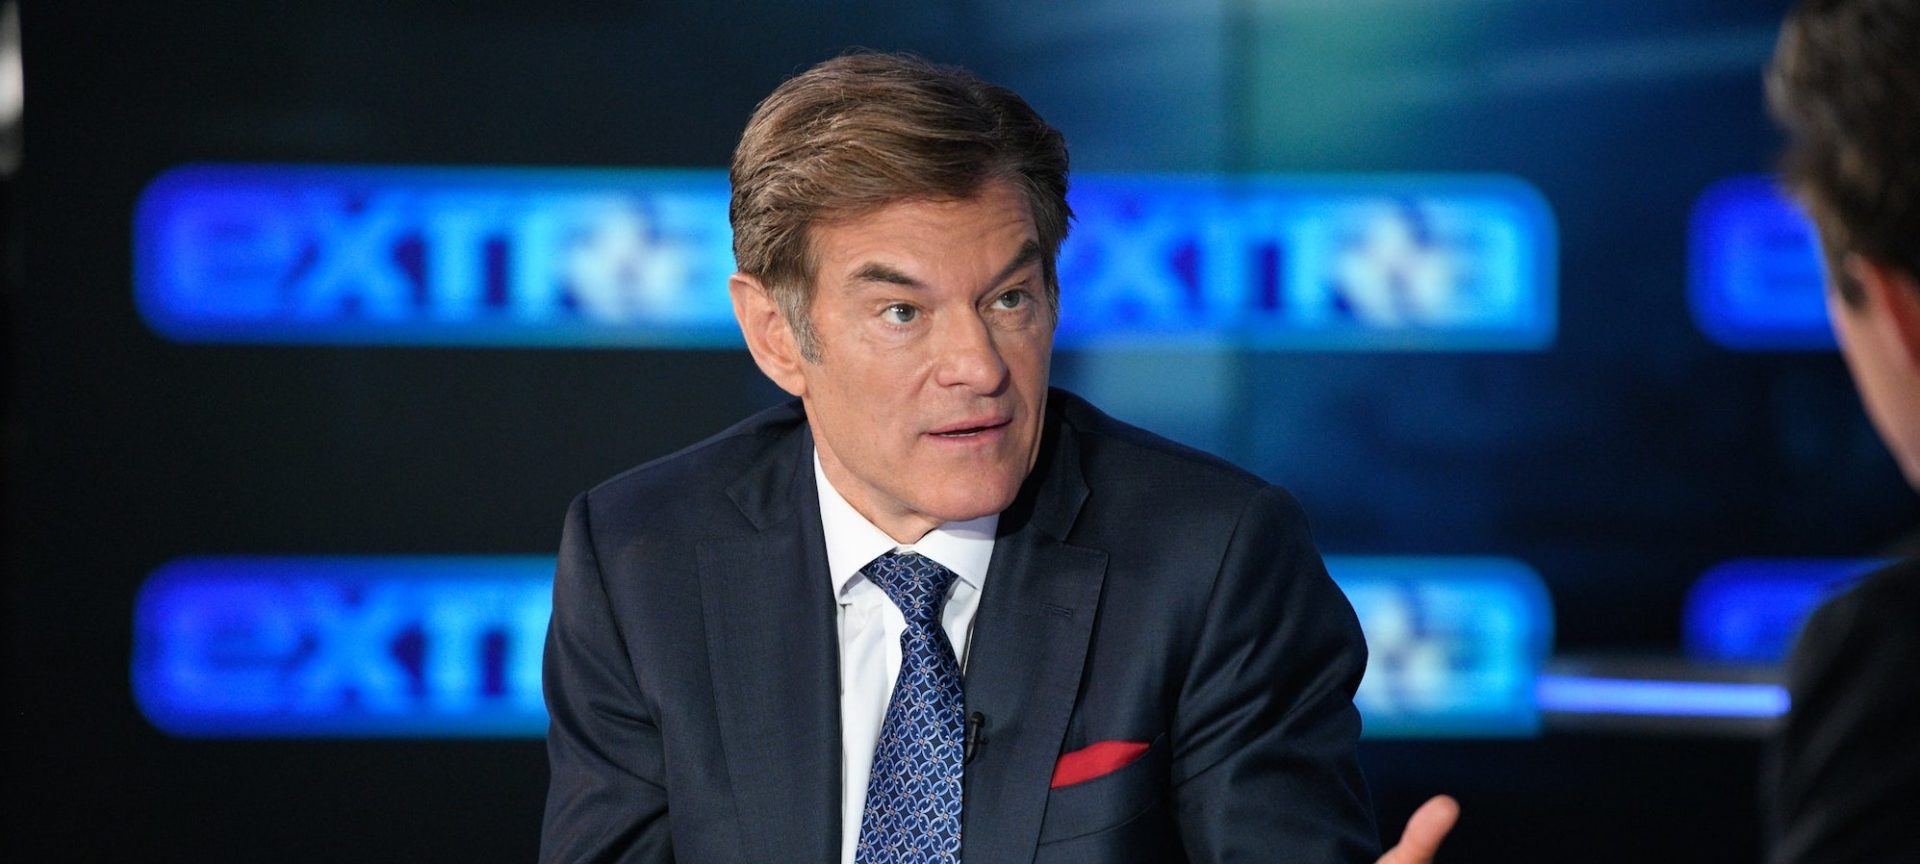 Columbia University finally cuts ties with America’s Quack Dr. Oz